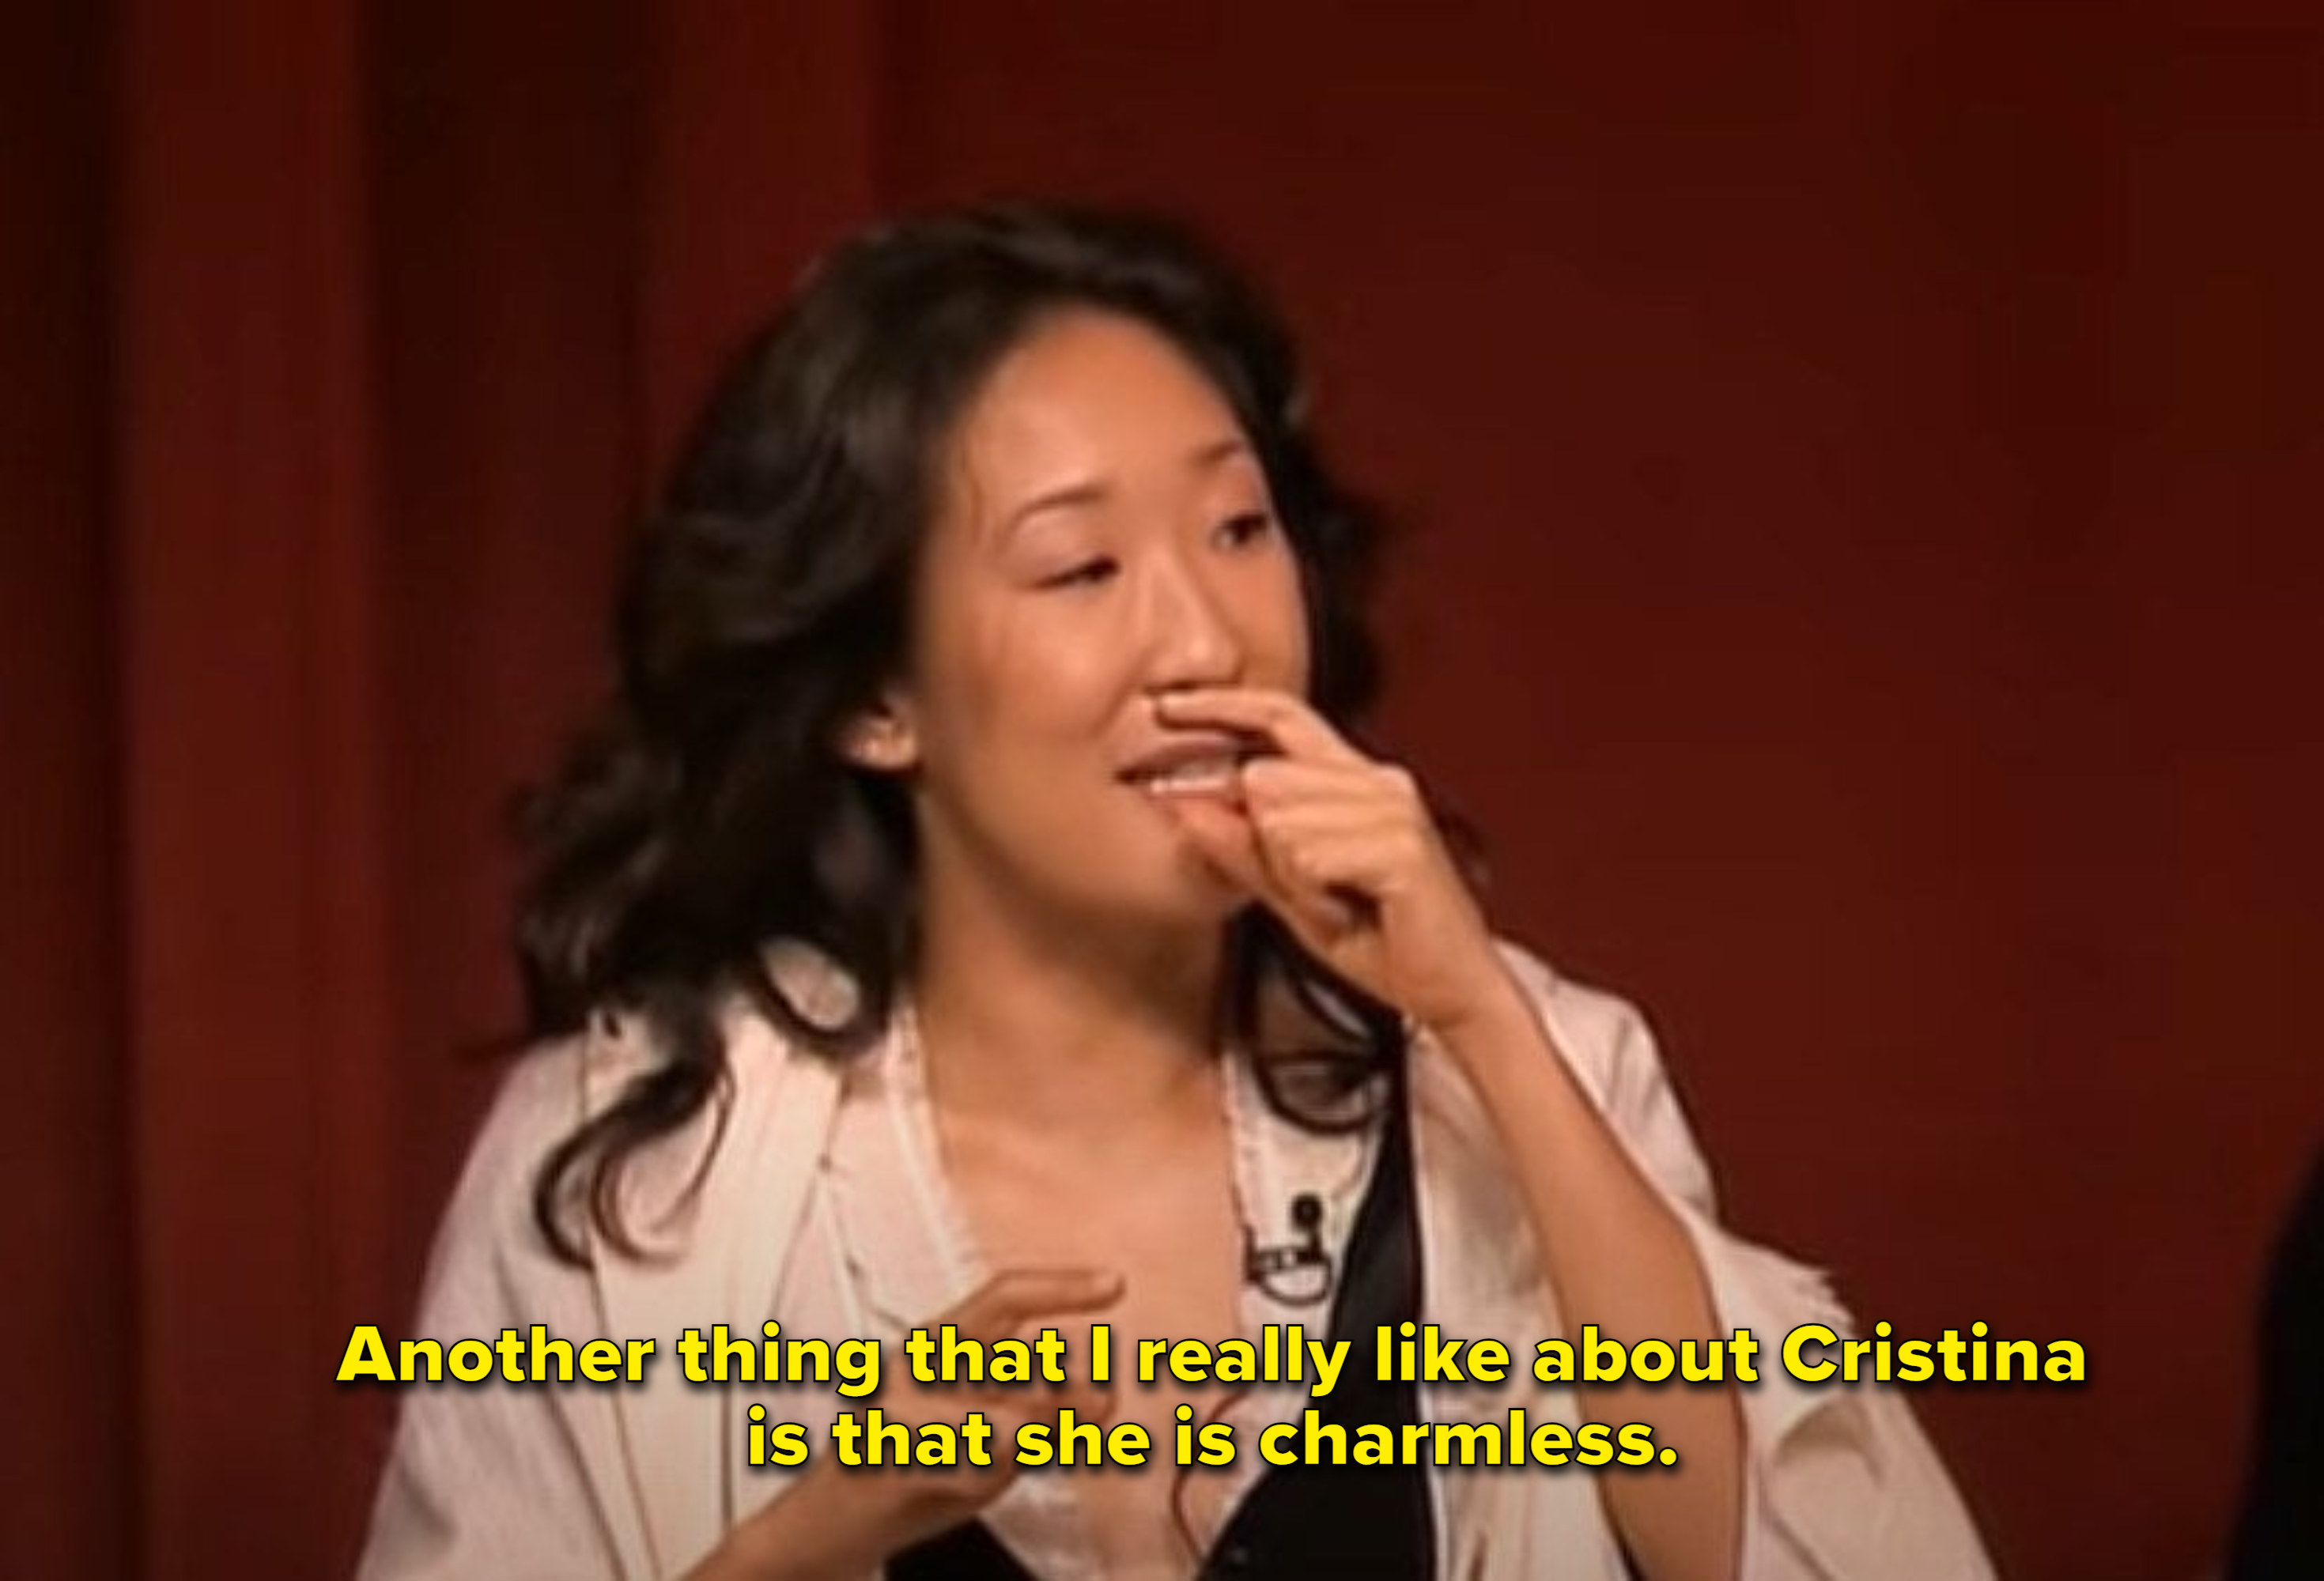 Sandra Oh: &quot;Another thing that I love about Cristina is that she is charmless&quot;